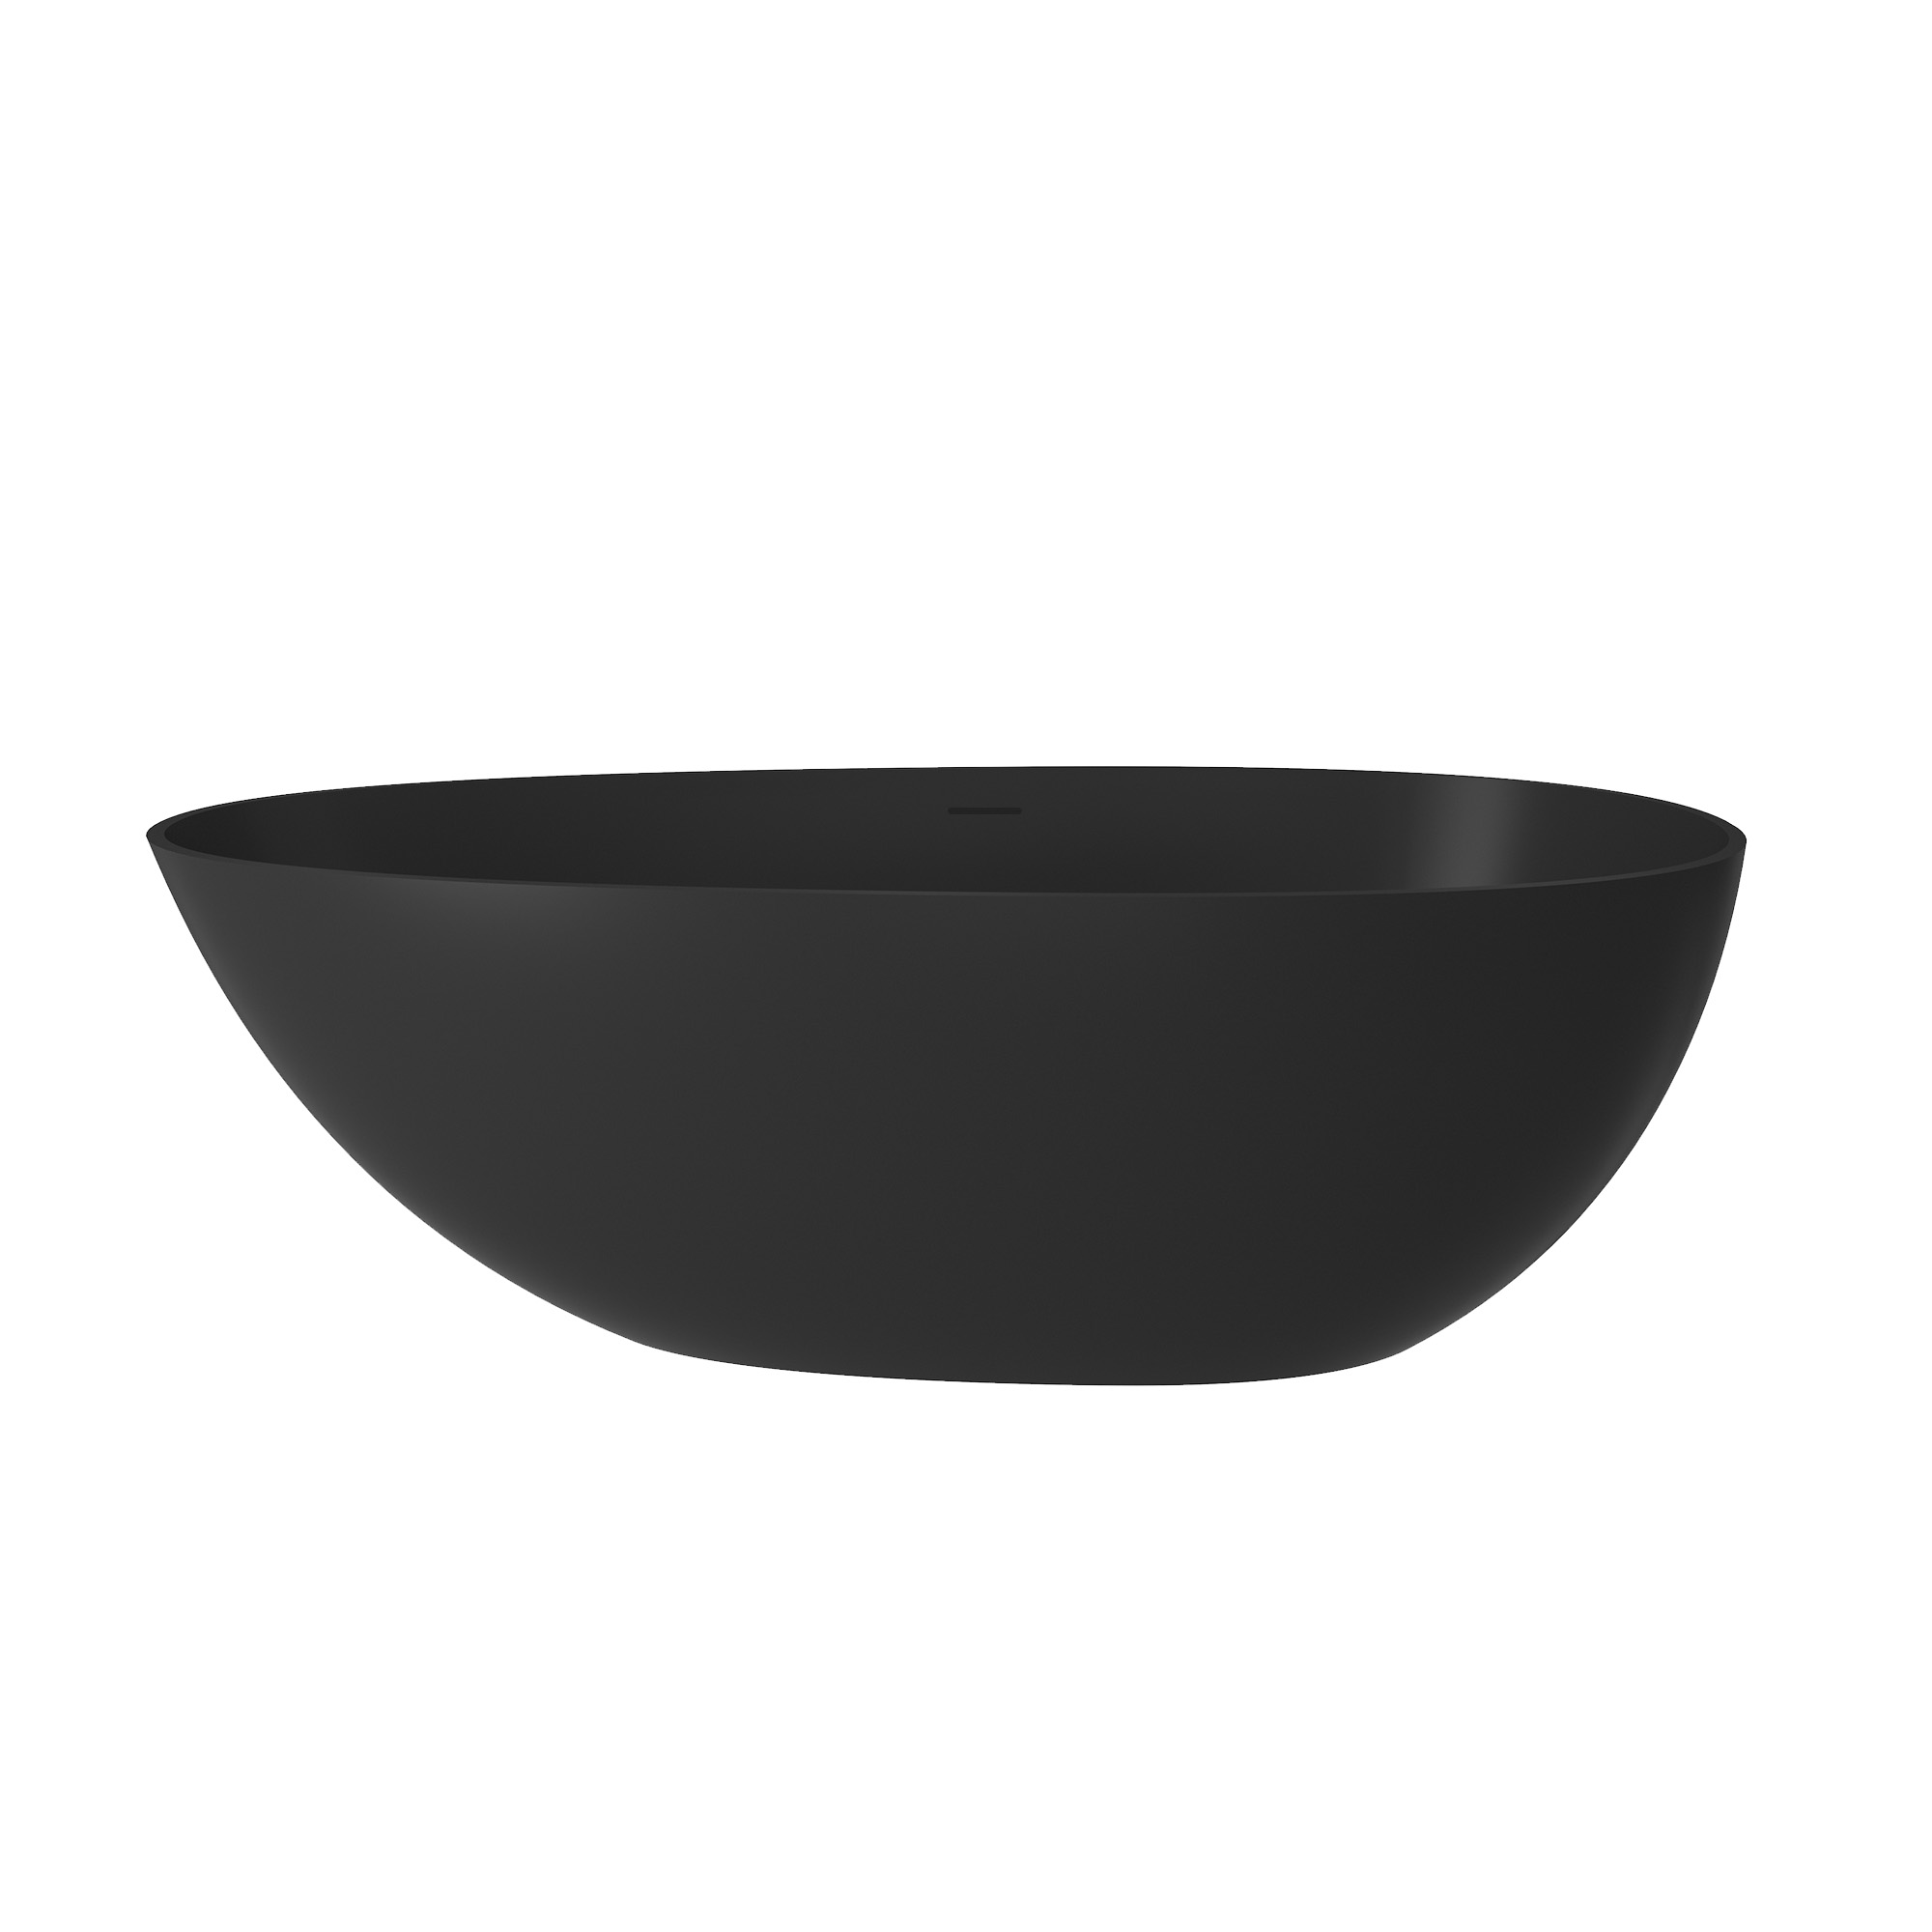 59" Solid Surface Freestanding Bathtub, Egg Shell Shapes Stone Resin Freestanding Tub with Overflow and Center Drain, Matte Black Color, Bringing a Luxurious Touch to Every Length